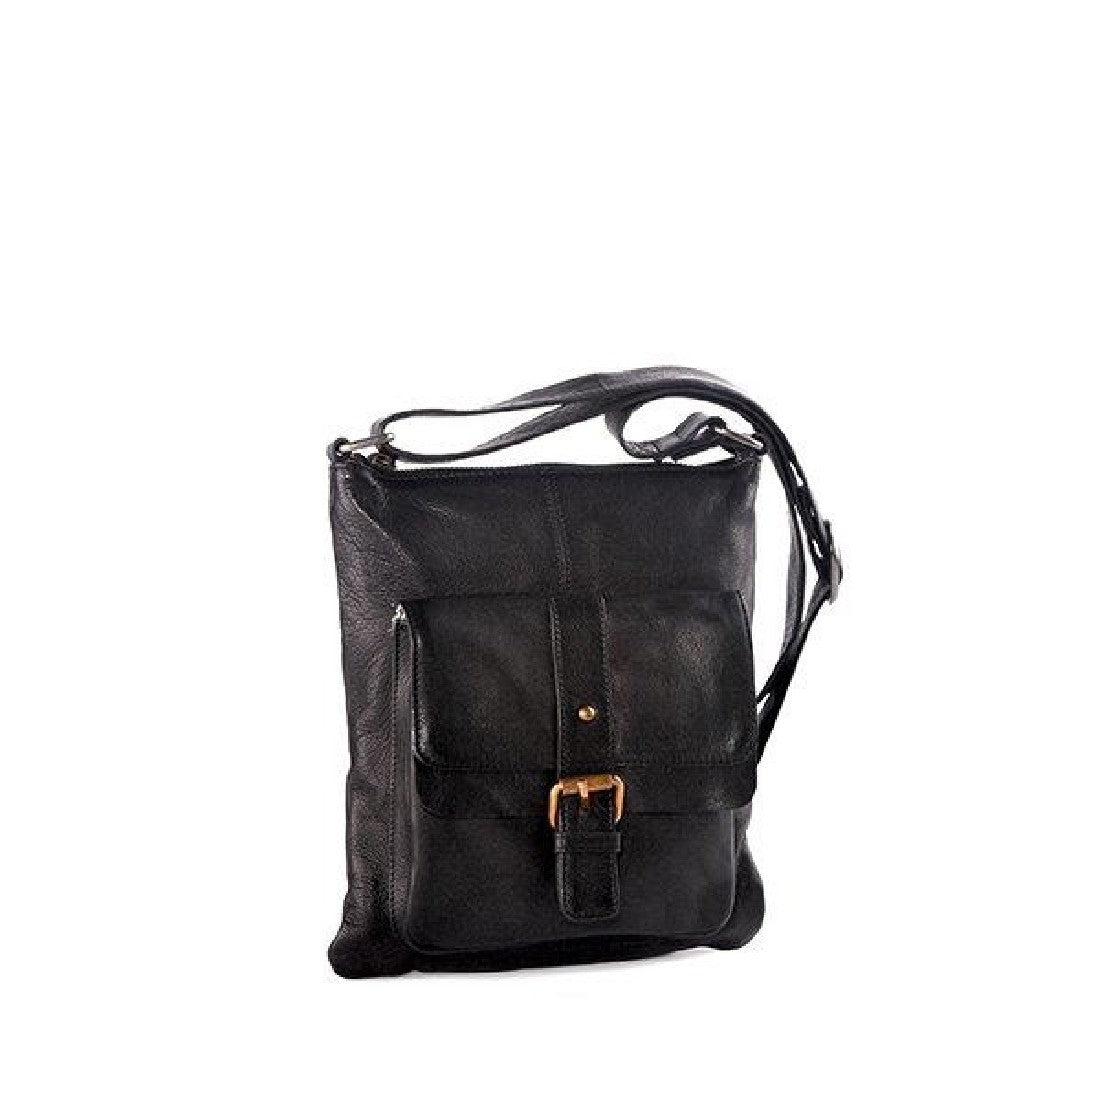 Oran By Rugged Hide Audrina Leather Crossbody